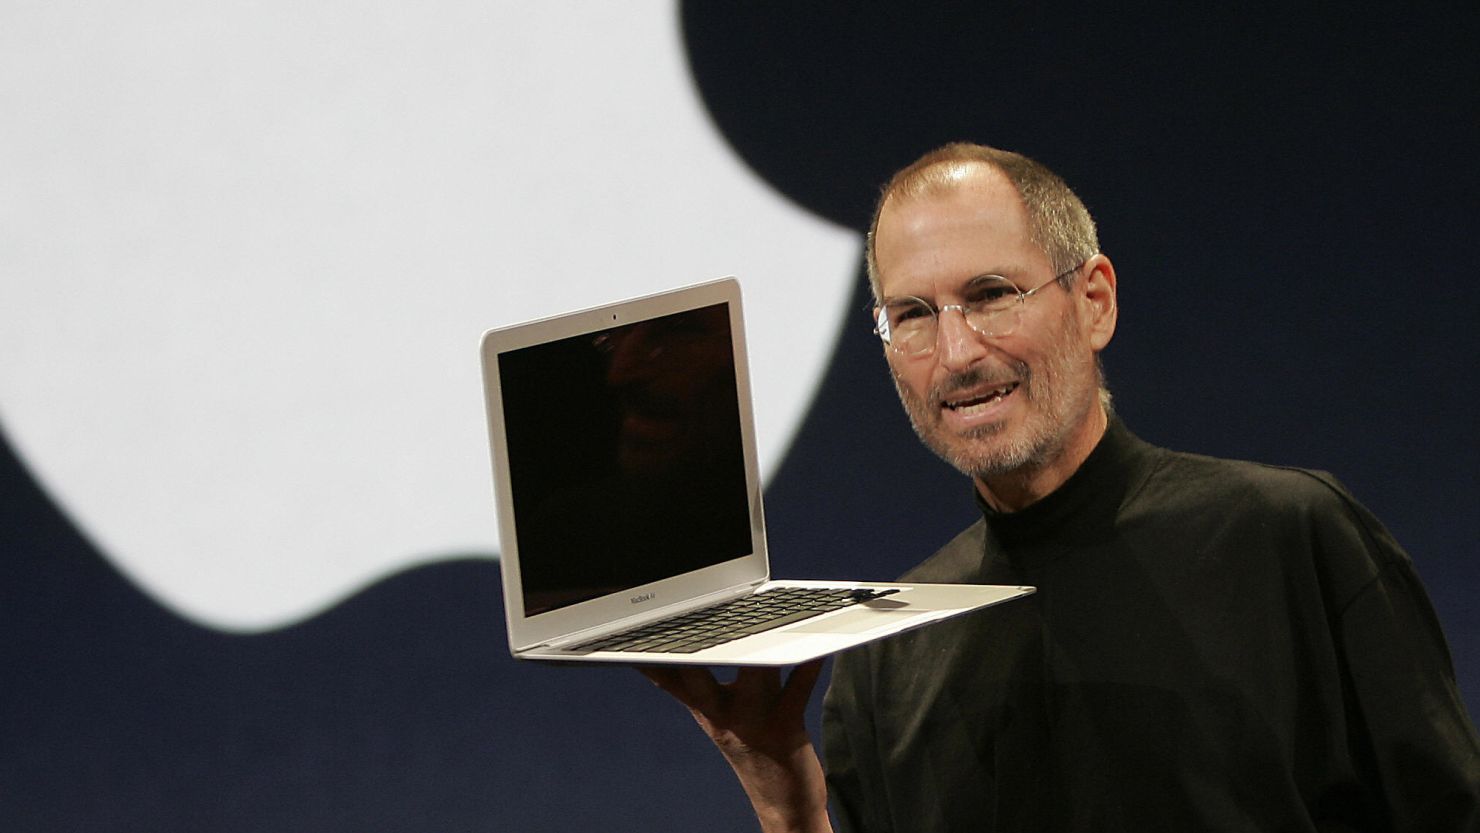 Apple co-founder Steve Jobs died Wednesday at home in Palo Alto, California.